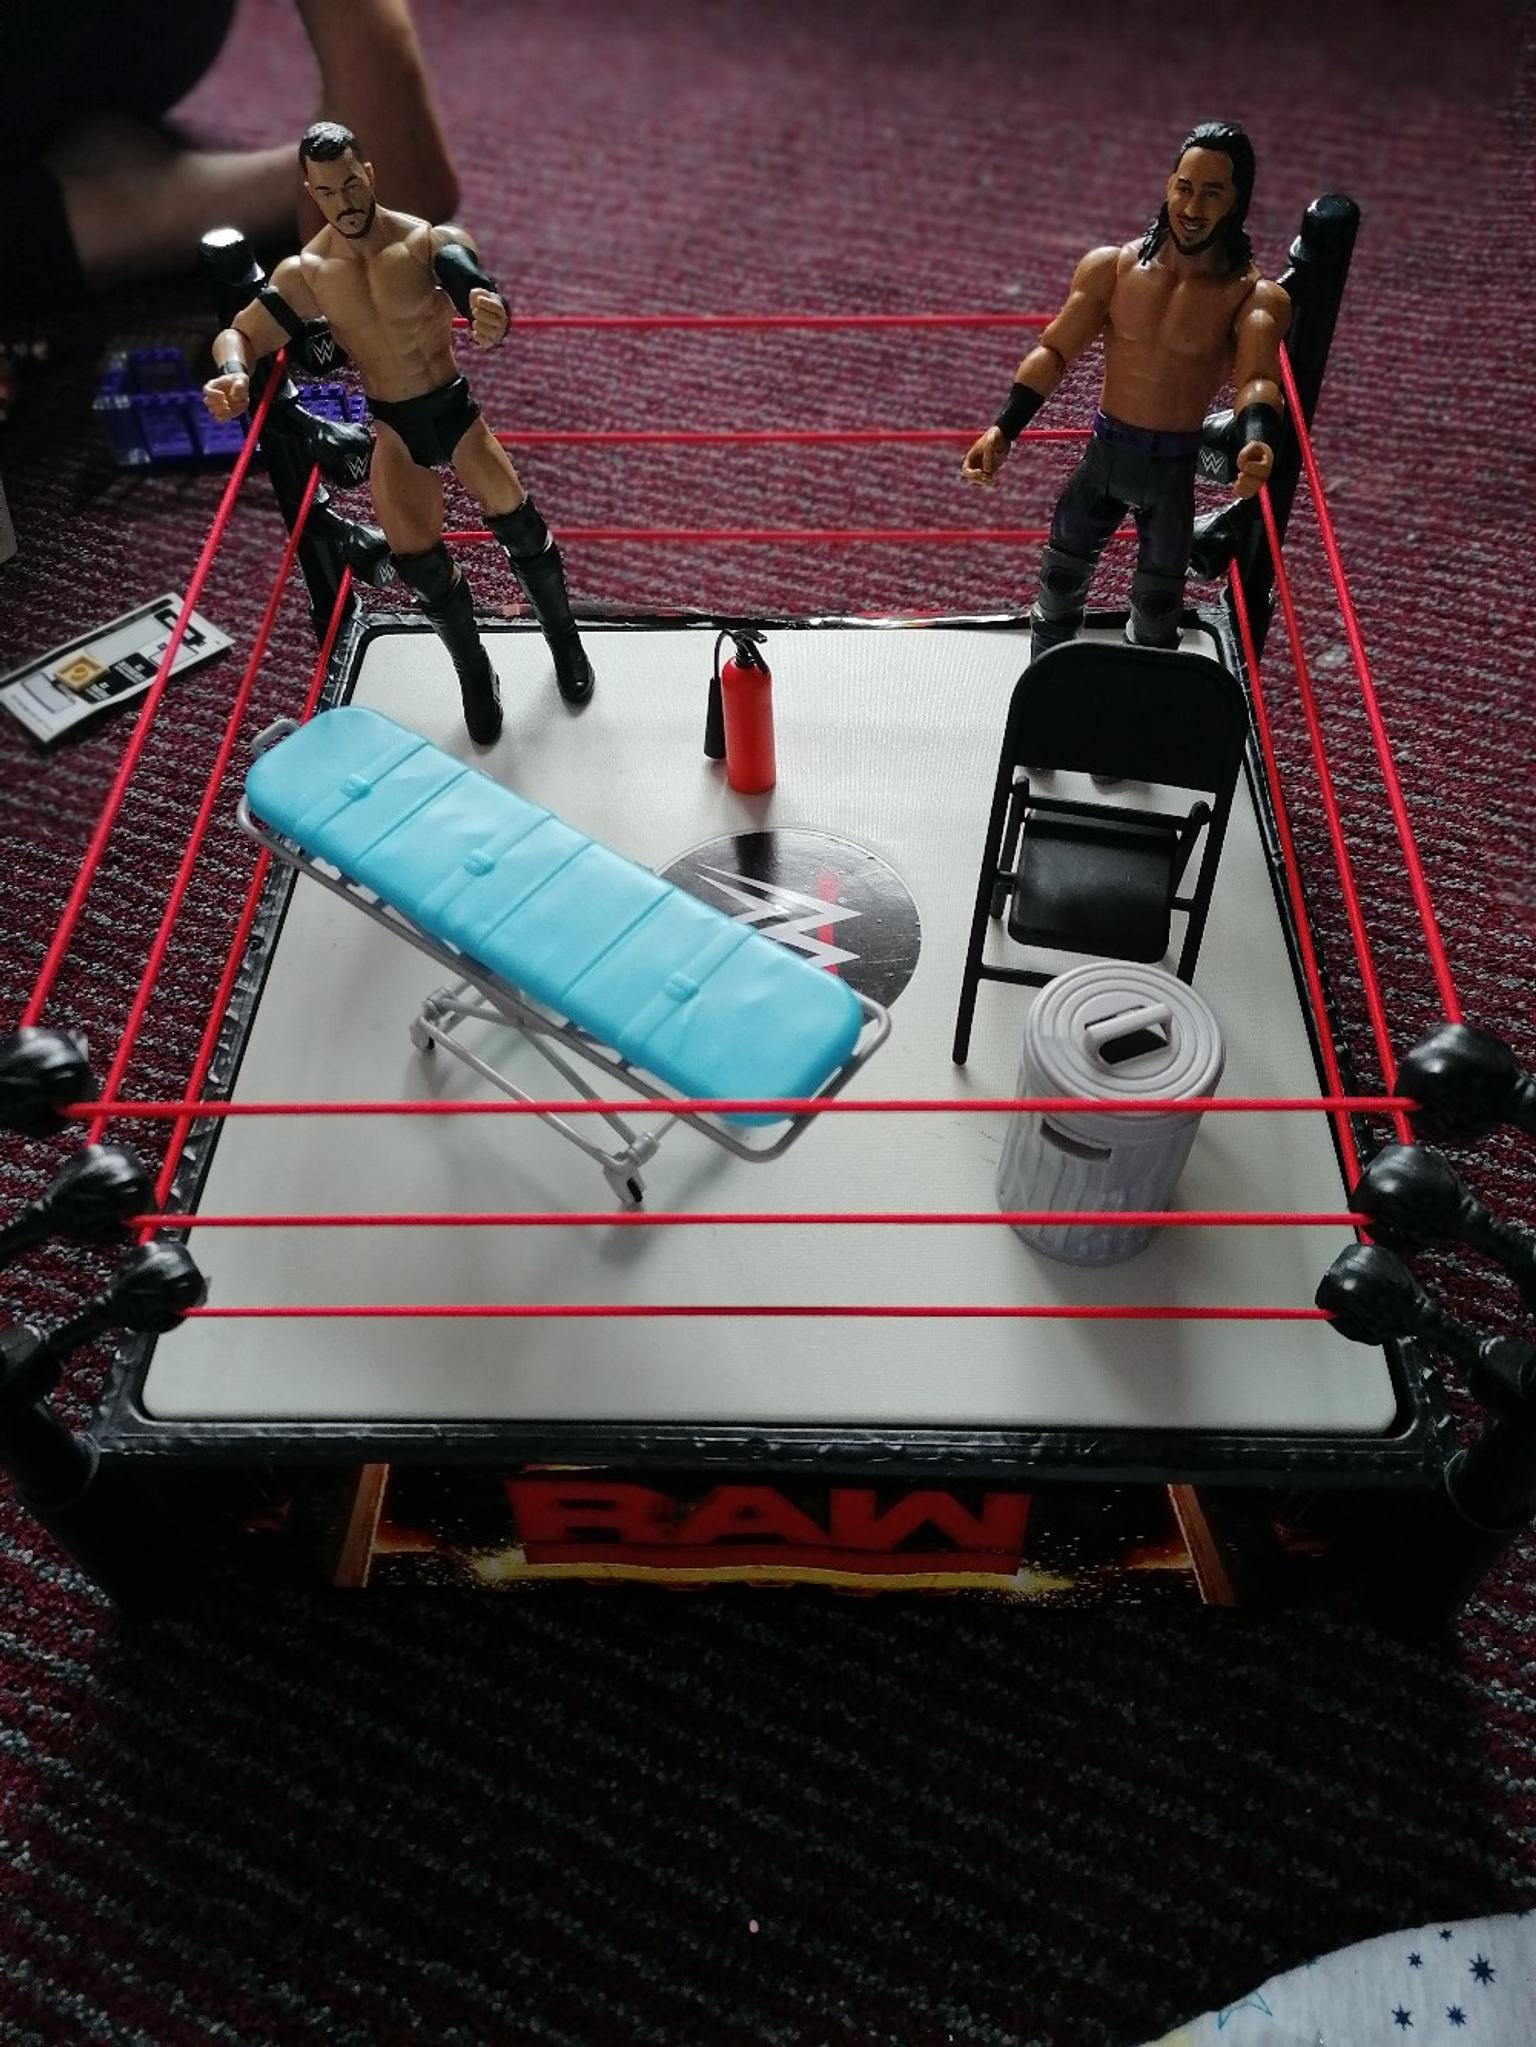 WWE wrestling ring in G73 Cambuslang for £10.00 for sale Shpock